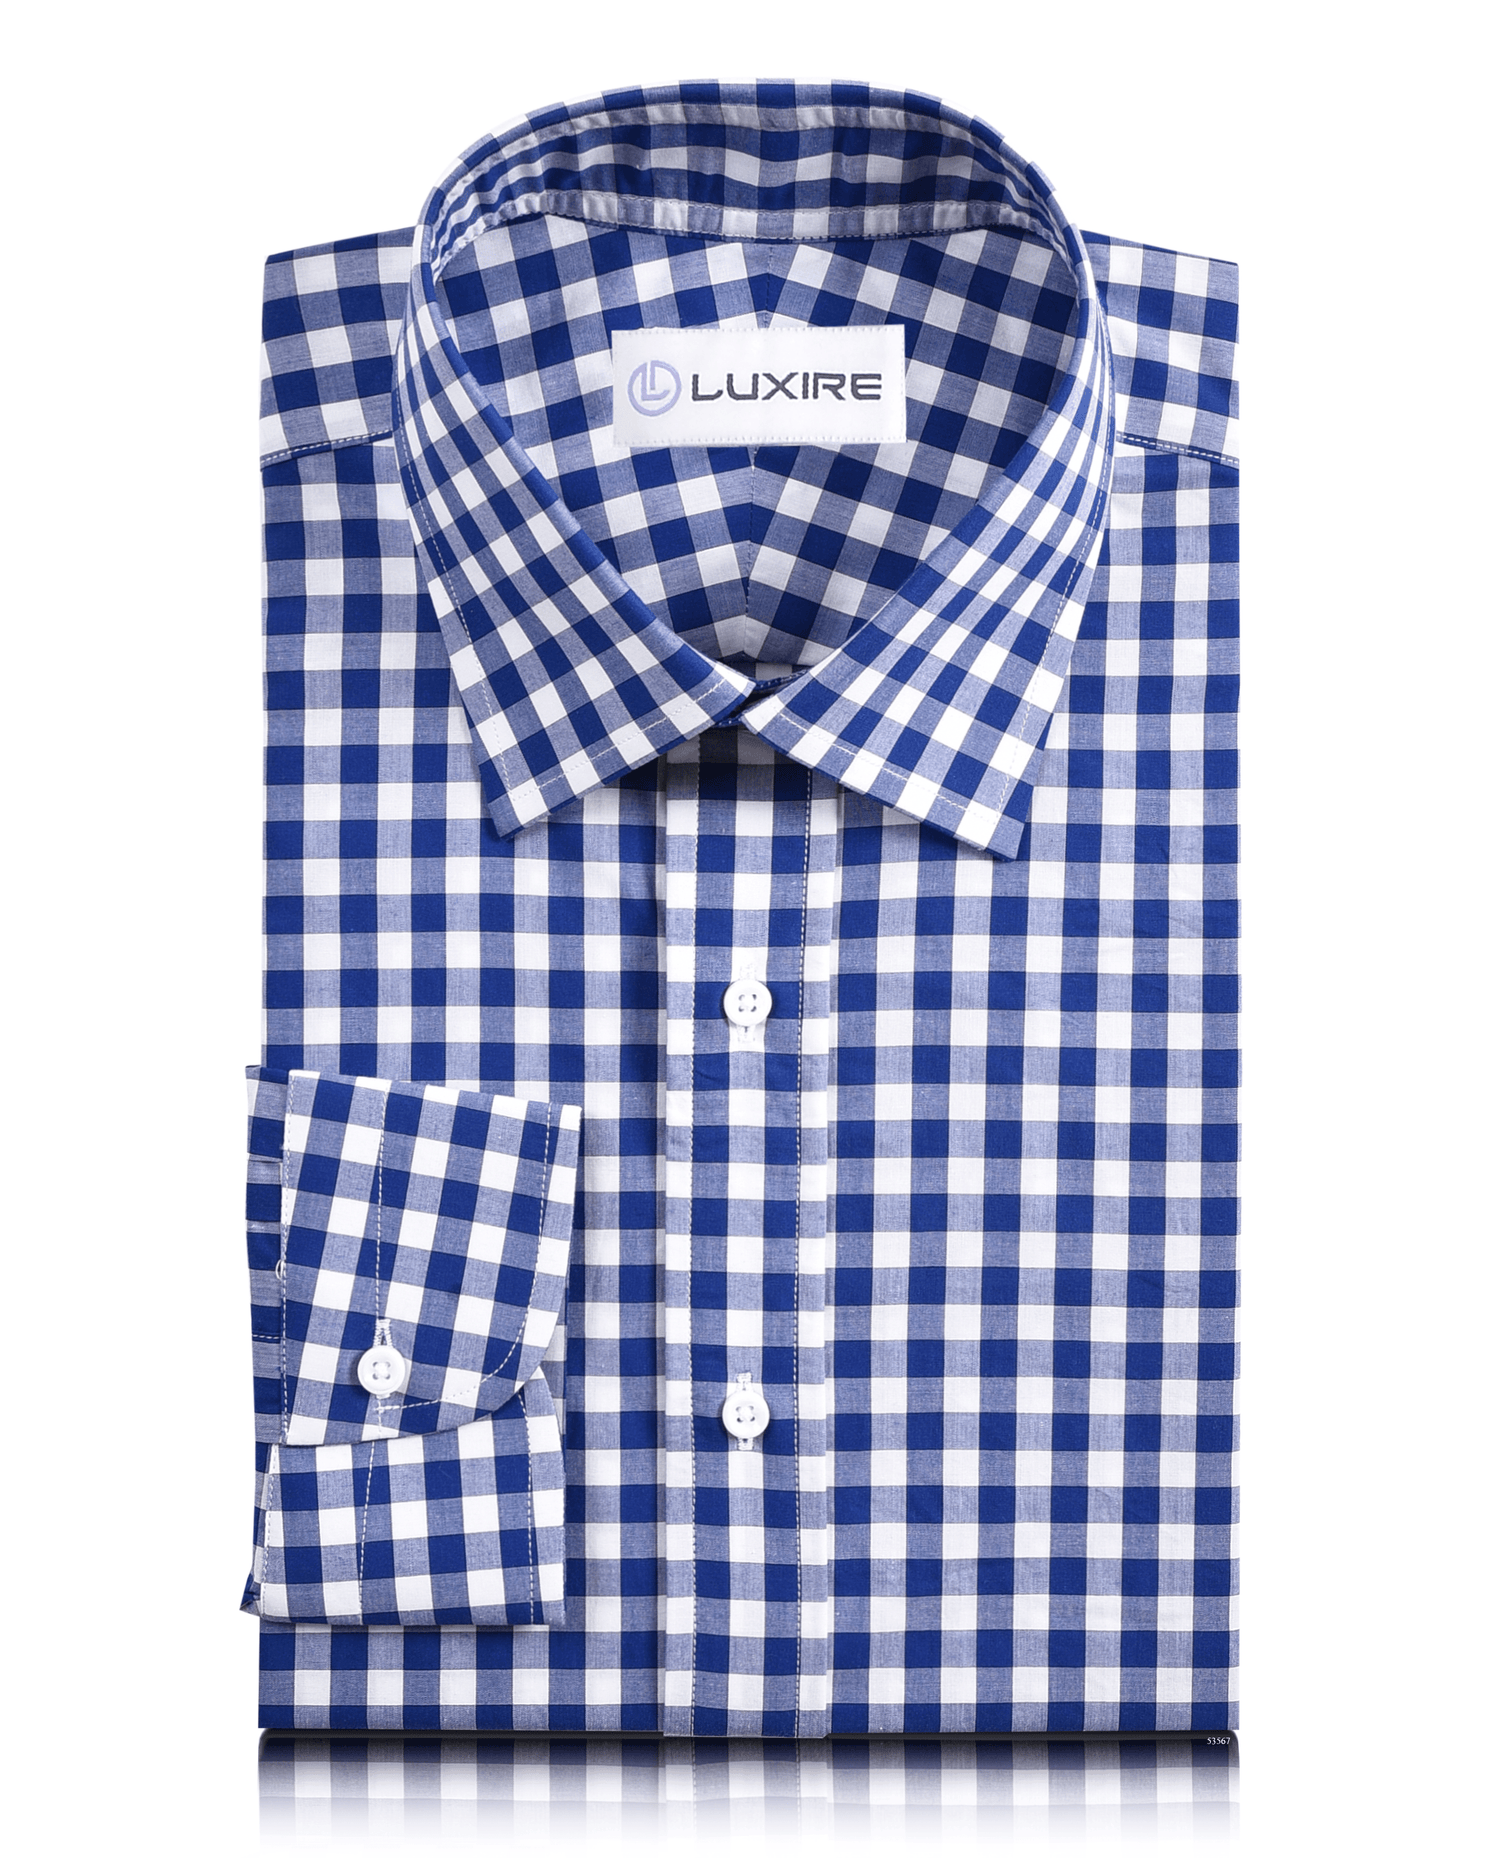 Front view of custom check shirts for men by Luxire blue gingham checks on white